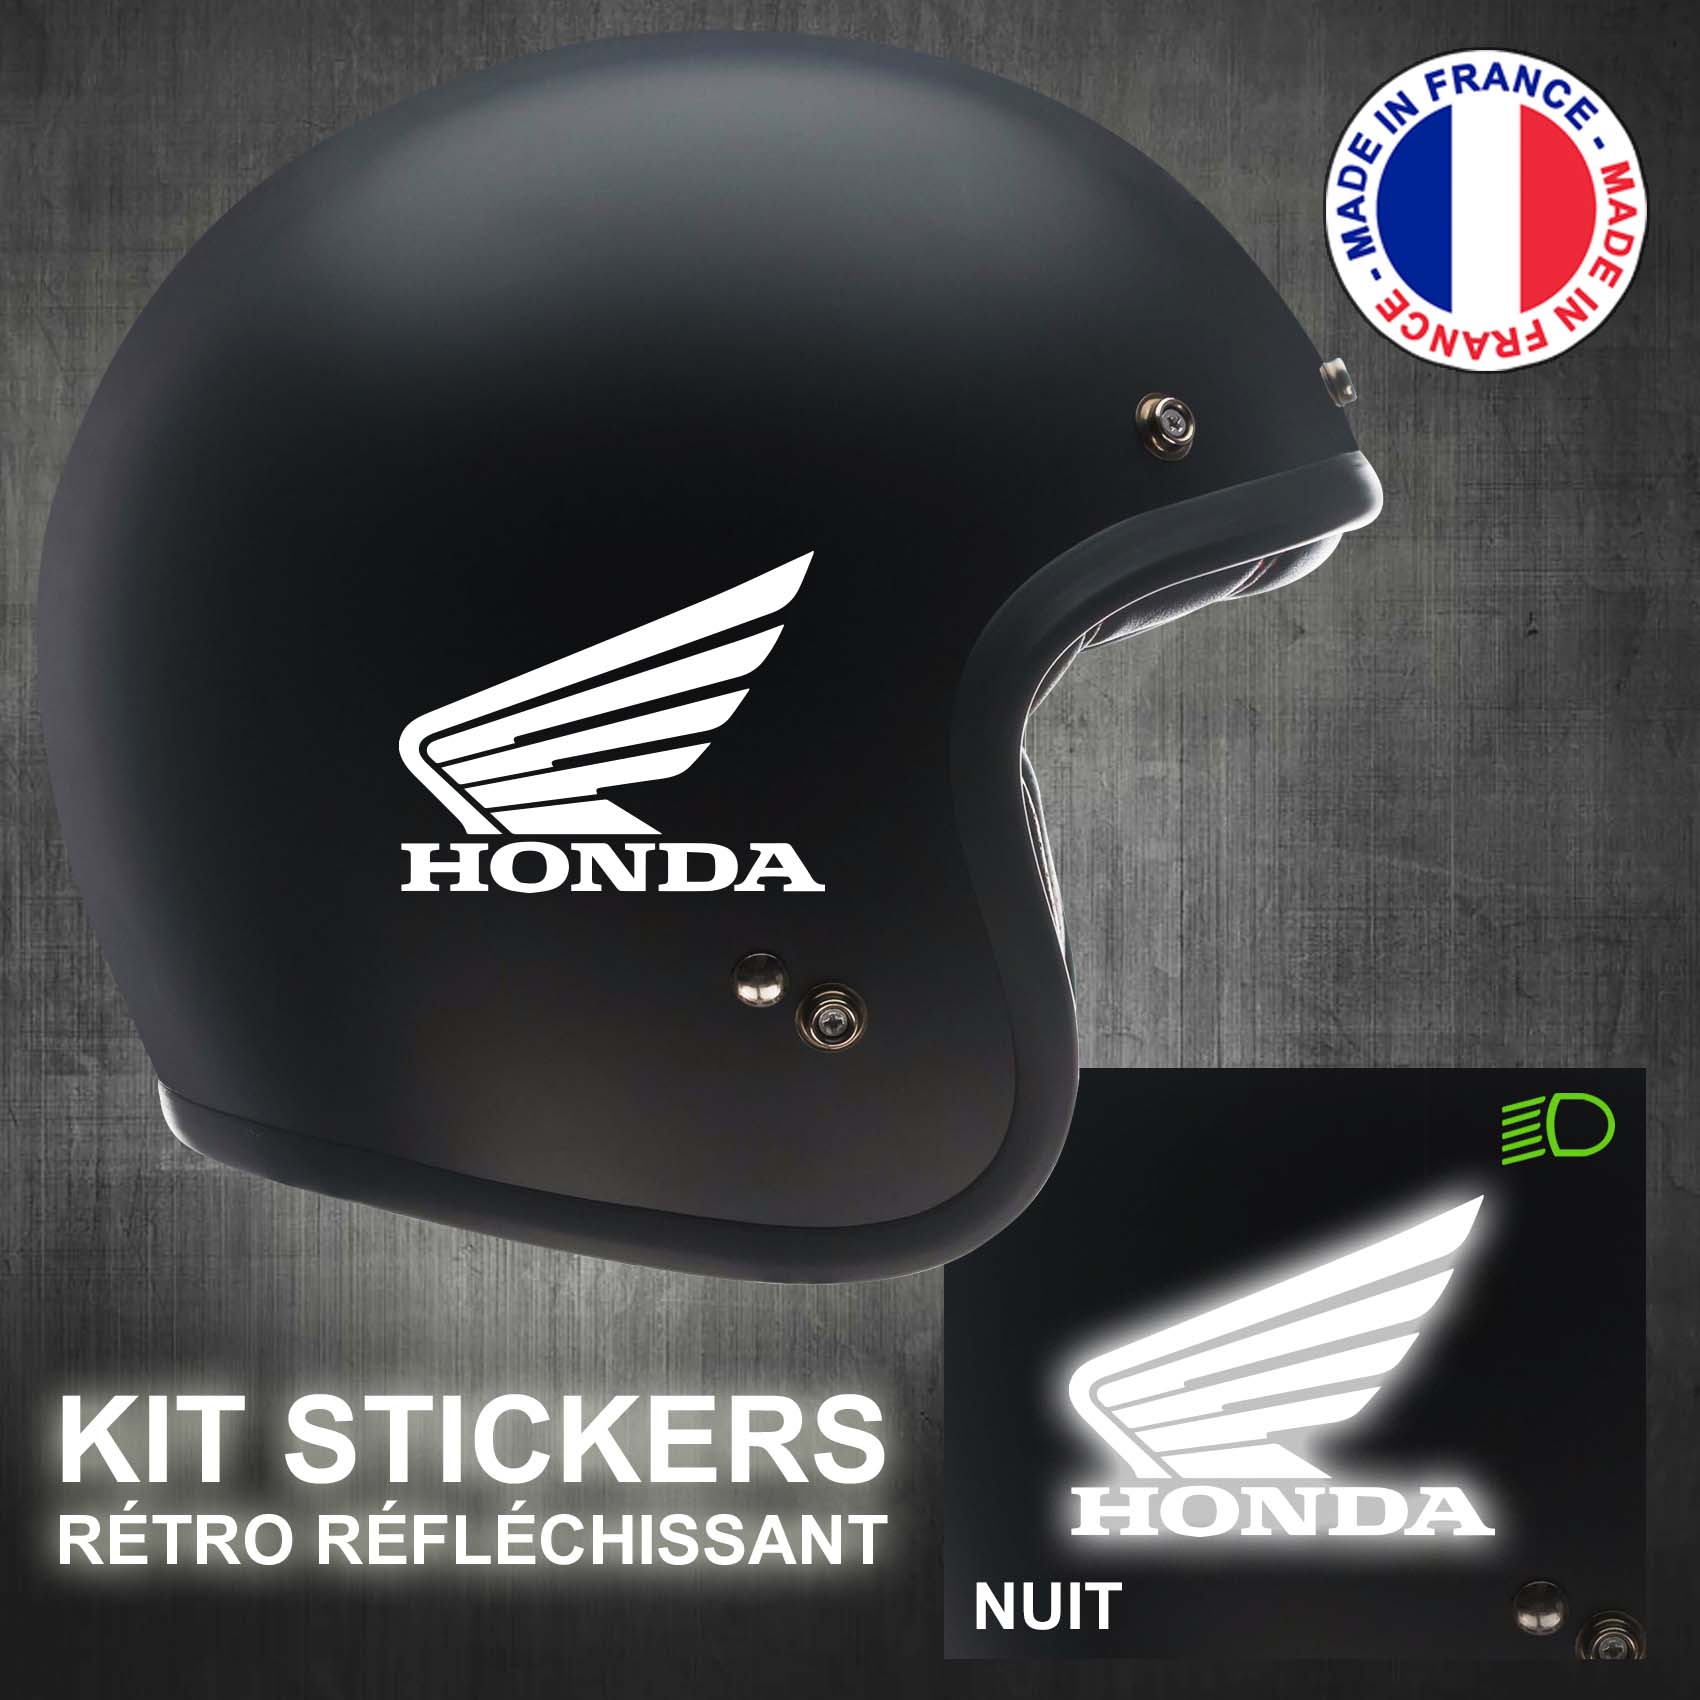 stickers-casque-moto-honda-ref1-retro-reflechissant-autocollant-noir-moto-velo-tuning-racing-route-sticker-casques-adhesif-scooter-nuit-securite-decals-personnalise-personnalisable-min